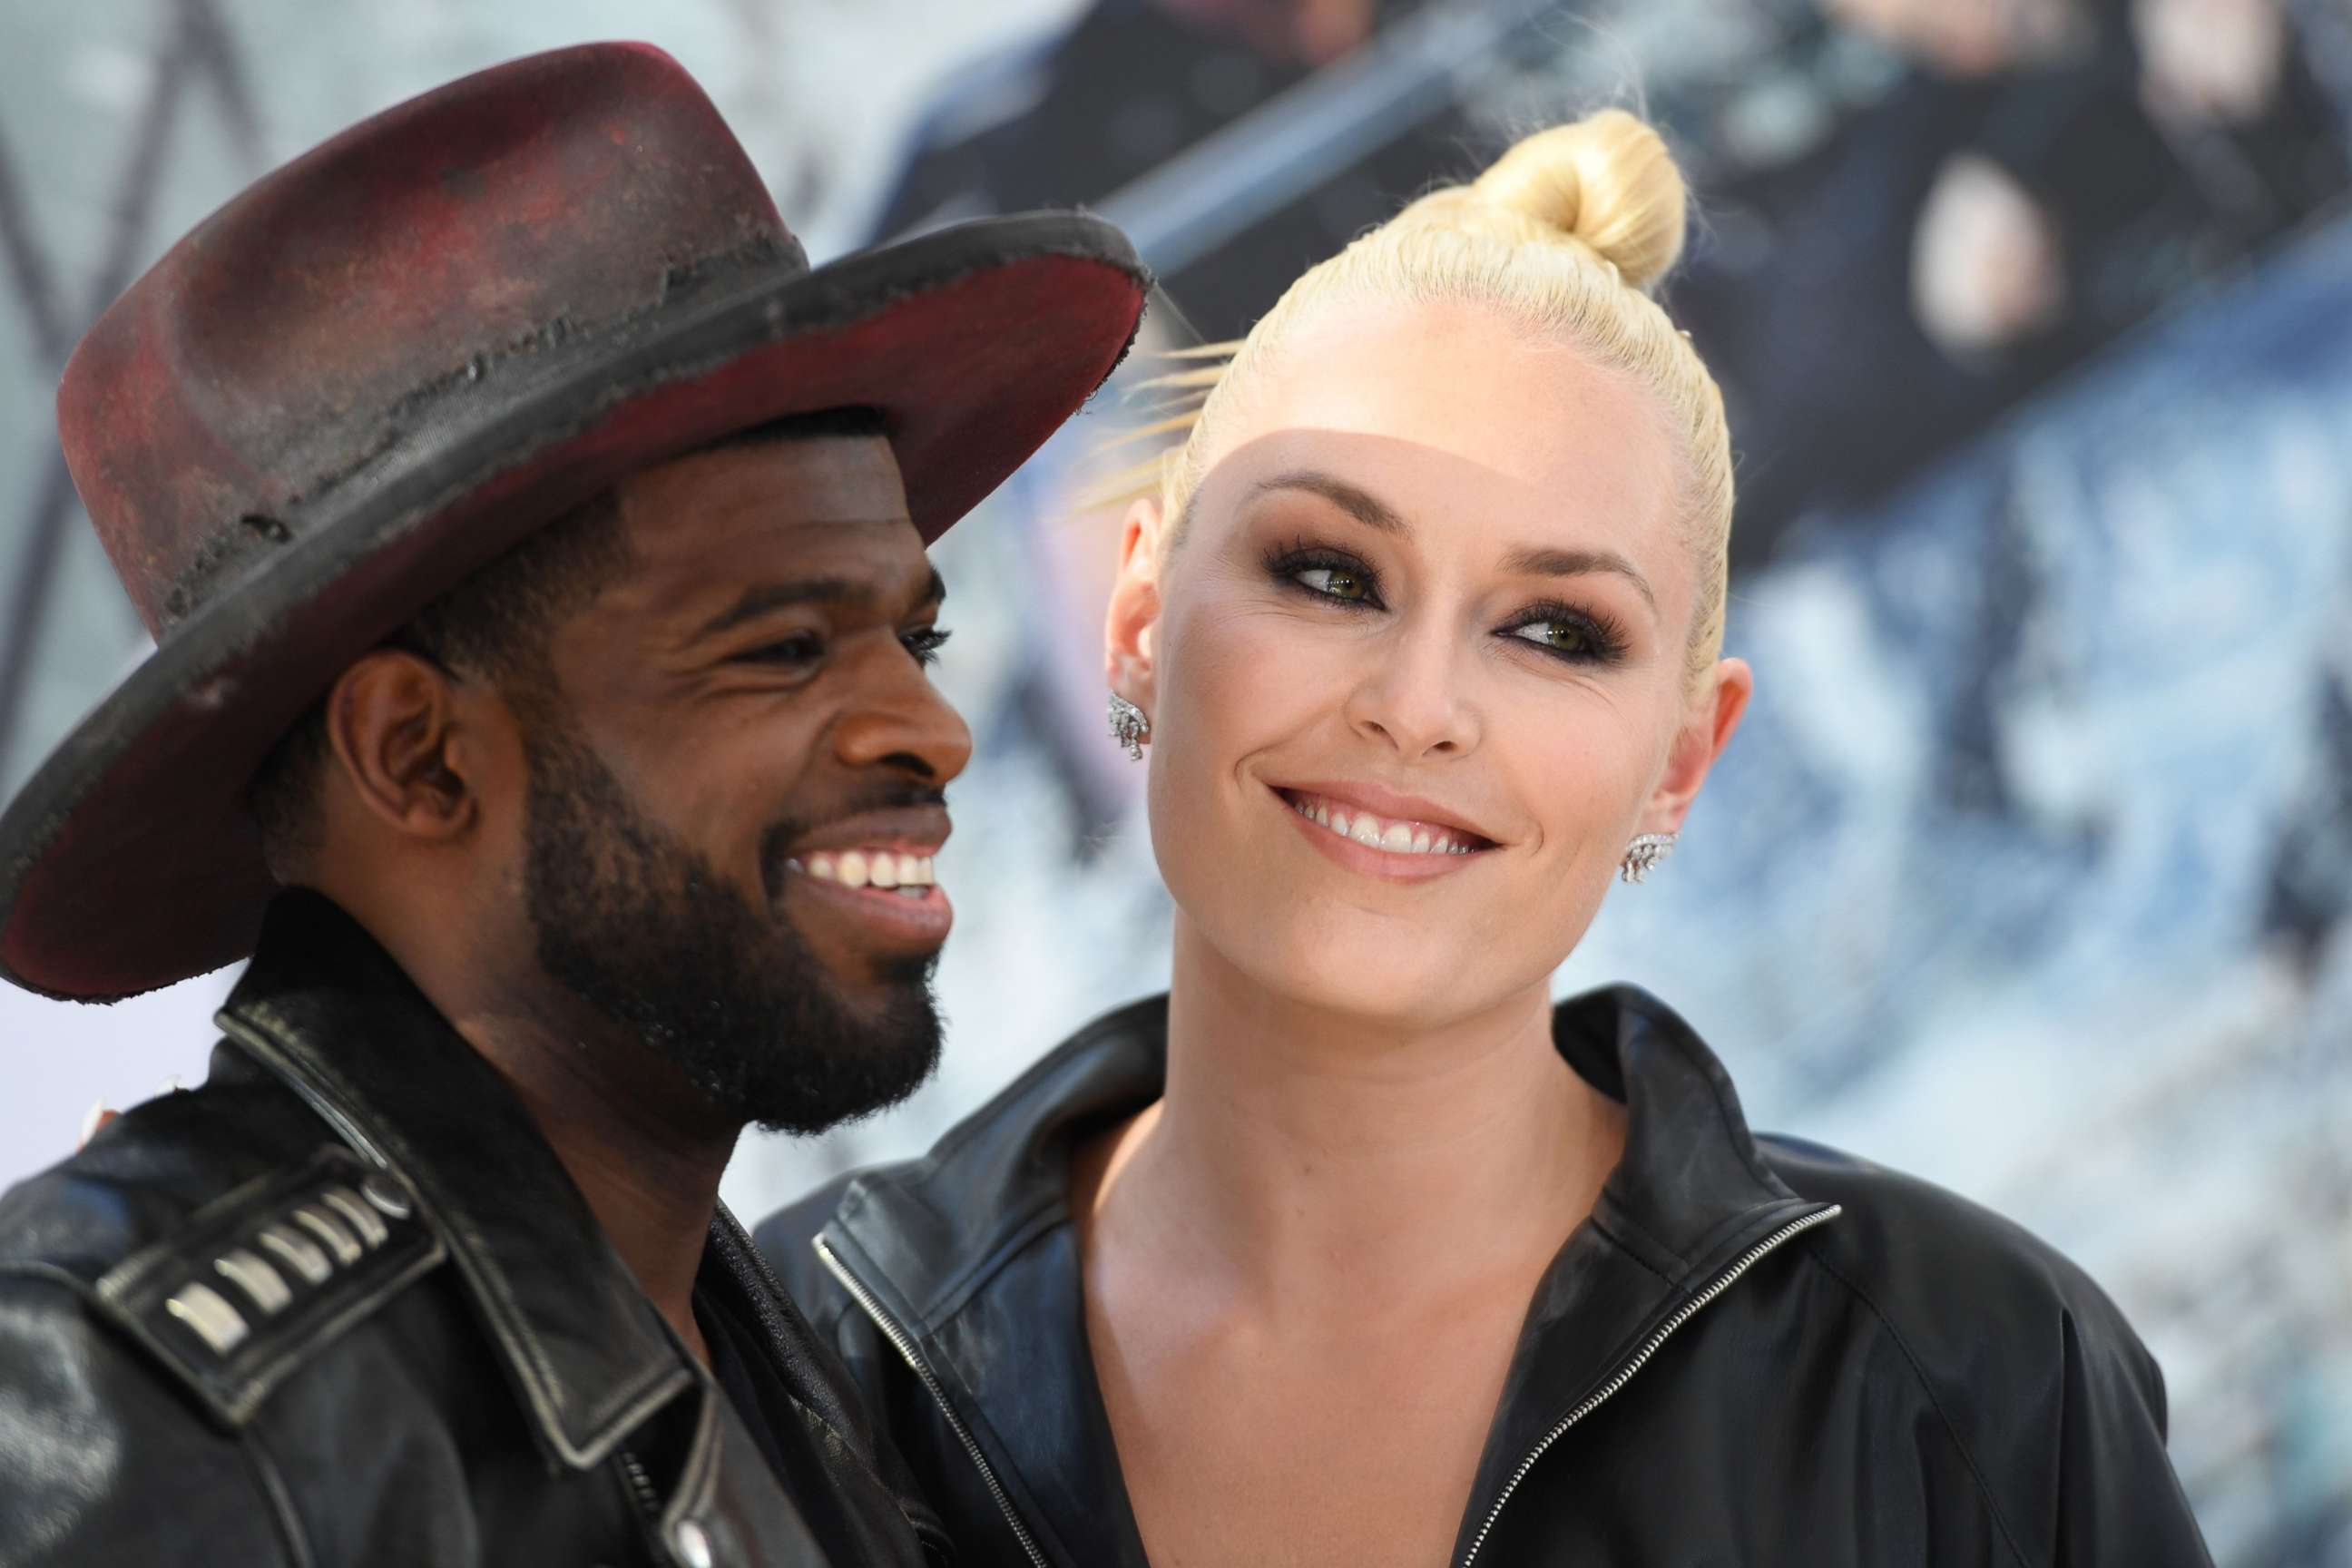 PHOTO: In this file photo taken on July 13, 2019, Canadian ice hockey player P.K. Subban and U.S. former alpine ski racer Lindsey Vonn attend the world premiere of "Fast & Furious presents Hobbs & Shaw," at the Dolby Theatre in Hollywood, Calif.